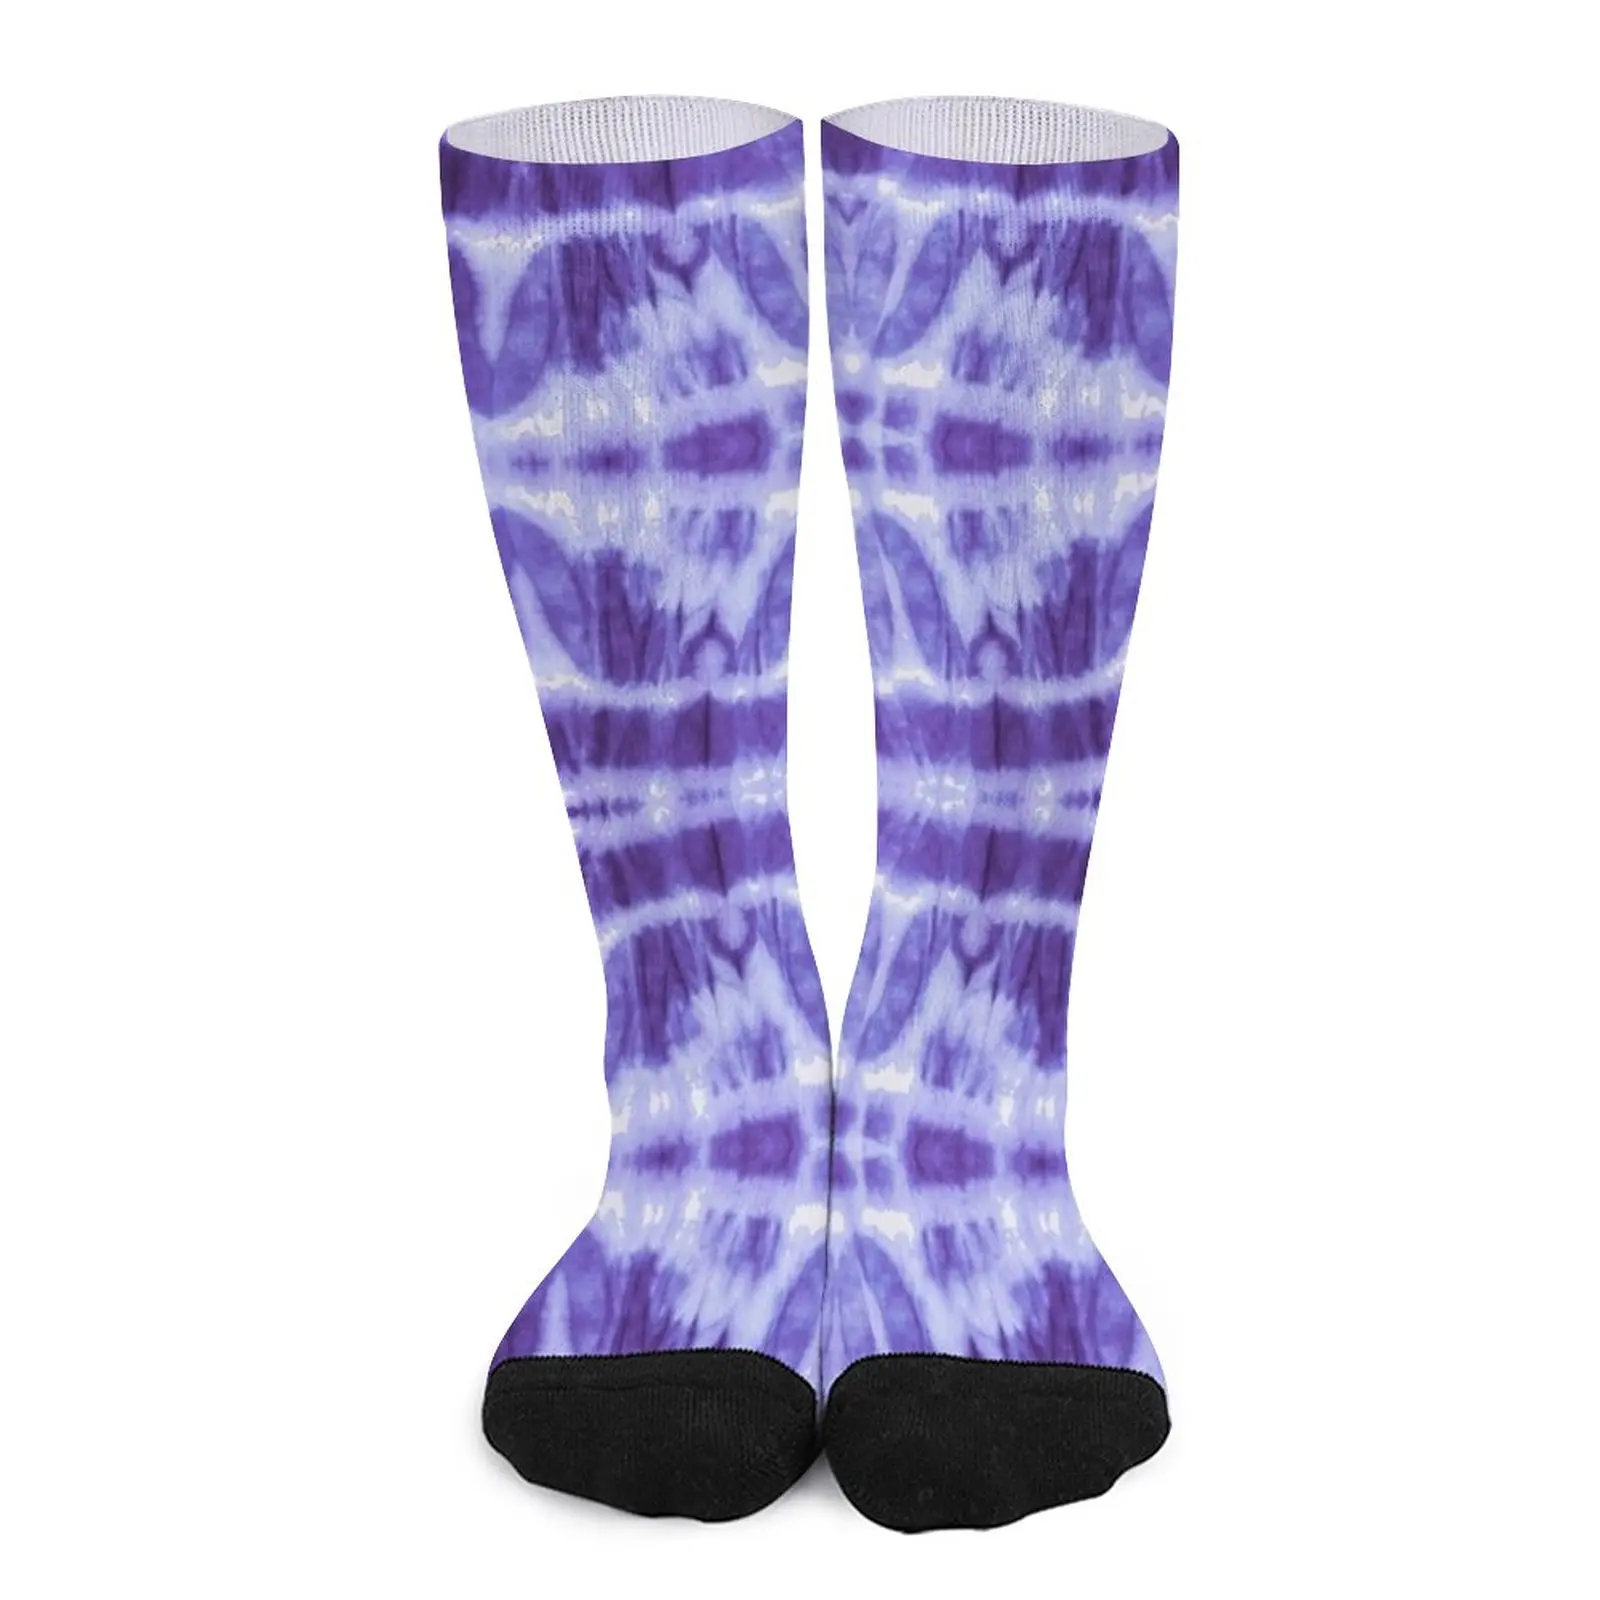 Tie Dye Violet Twos Socks Male sock golf Stockings compression socks ladies hair clip classic male headwear female ladies circel floral hair stick hair accessories chinese style hairpins hair fork